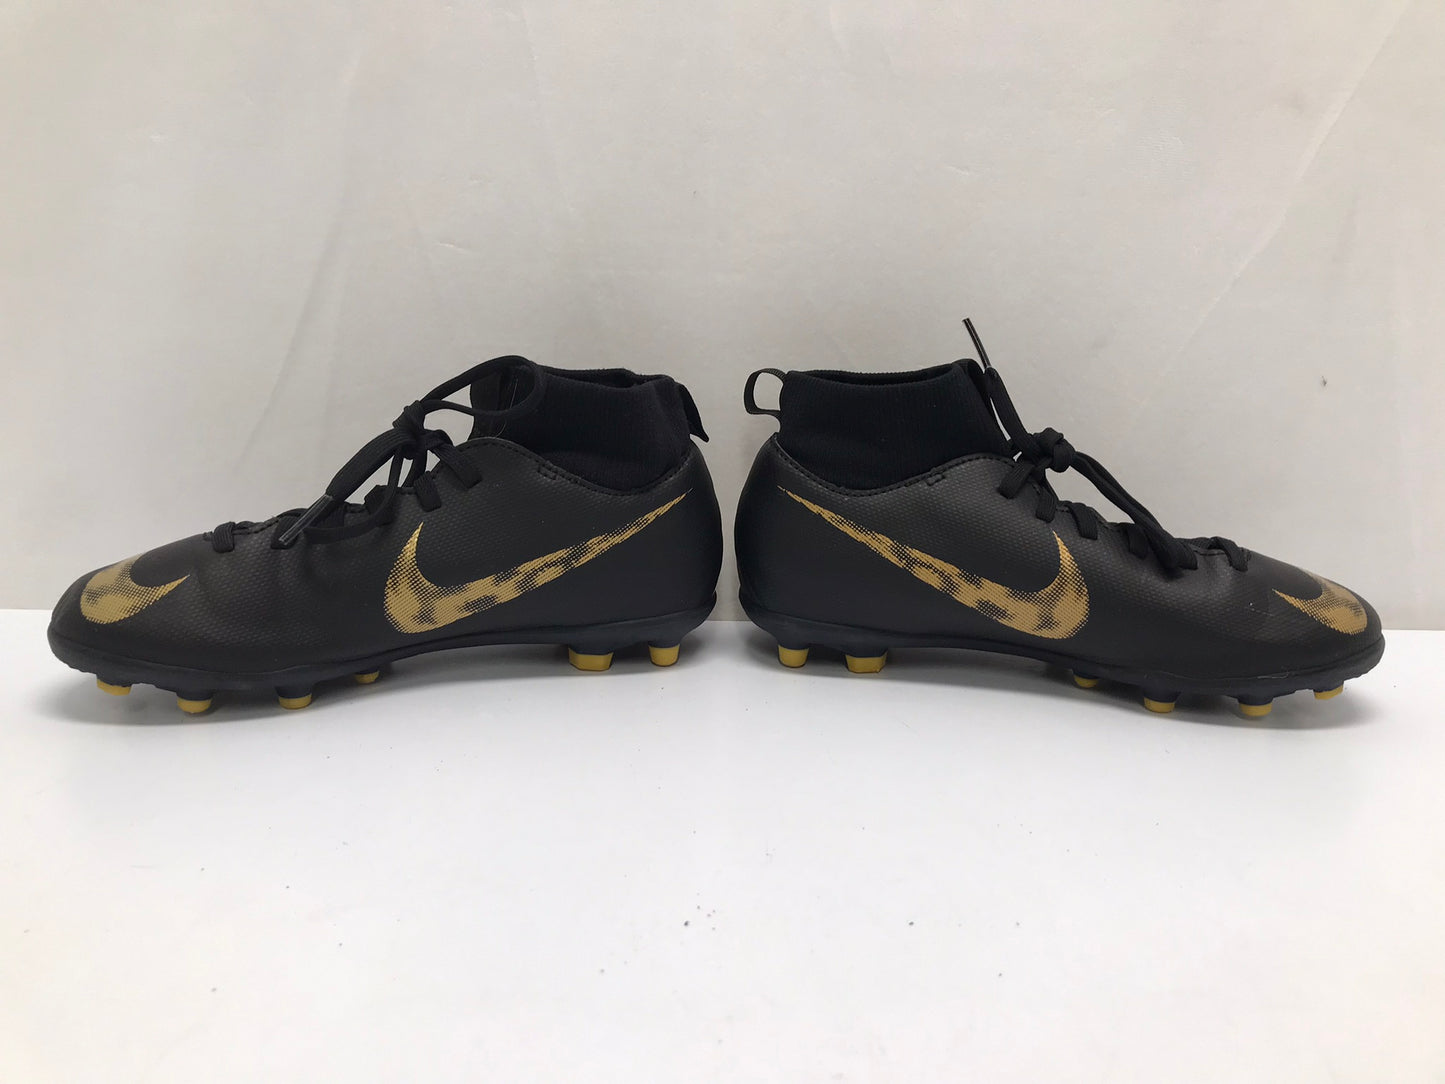 Soccer Shoes Cleats Child Size 4 Nike Mercurial Black Gold With Slipper Foot